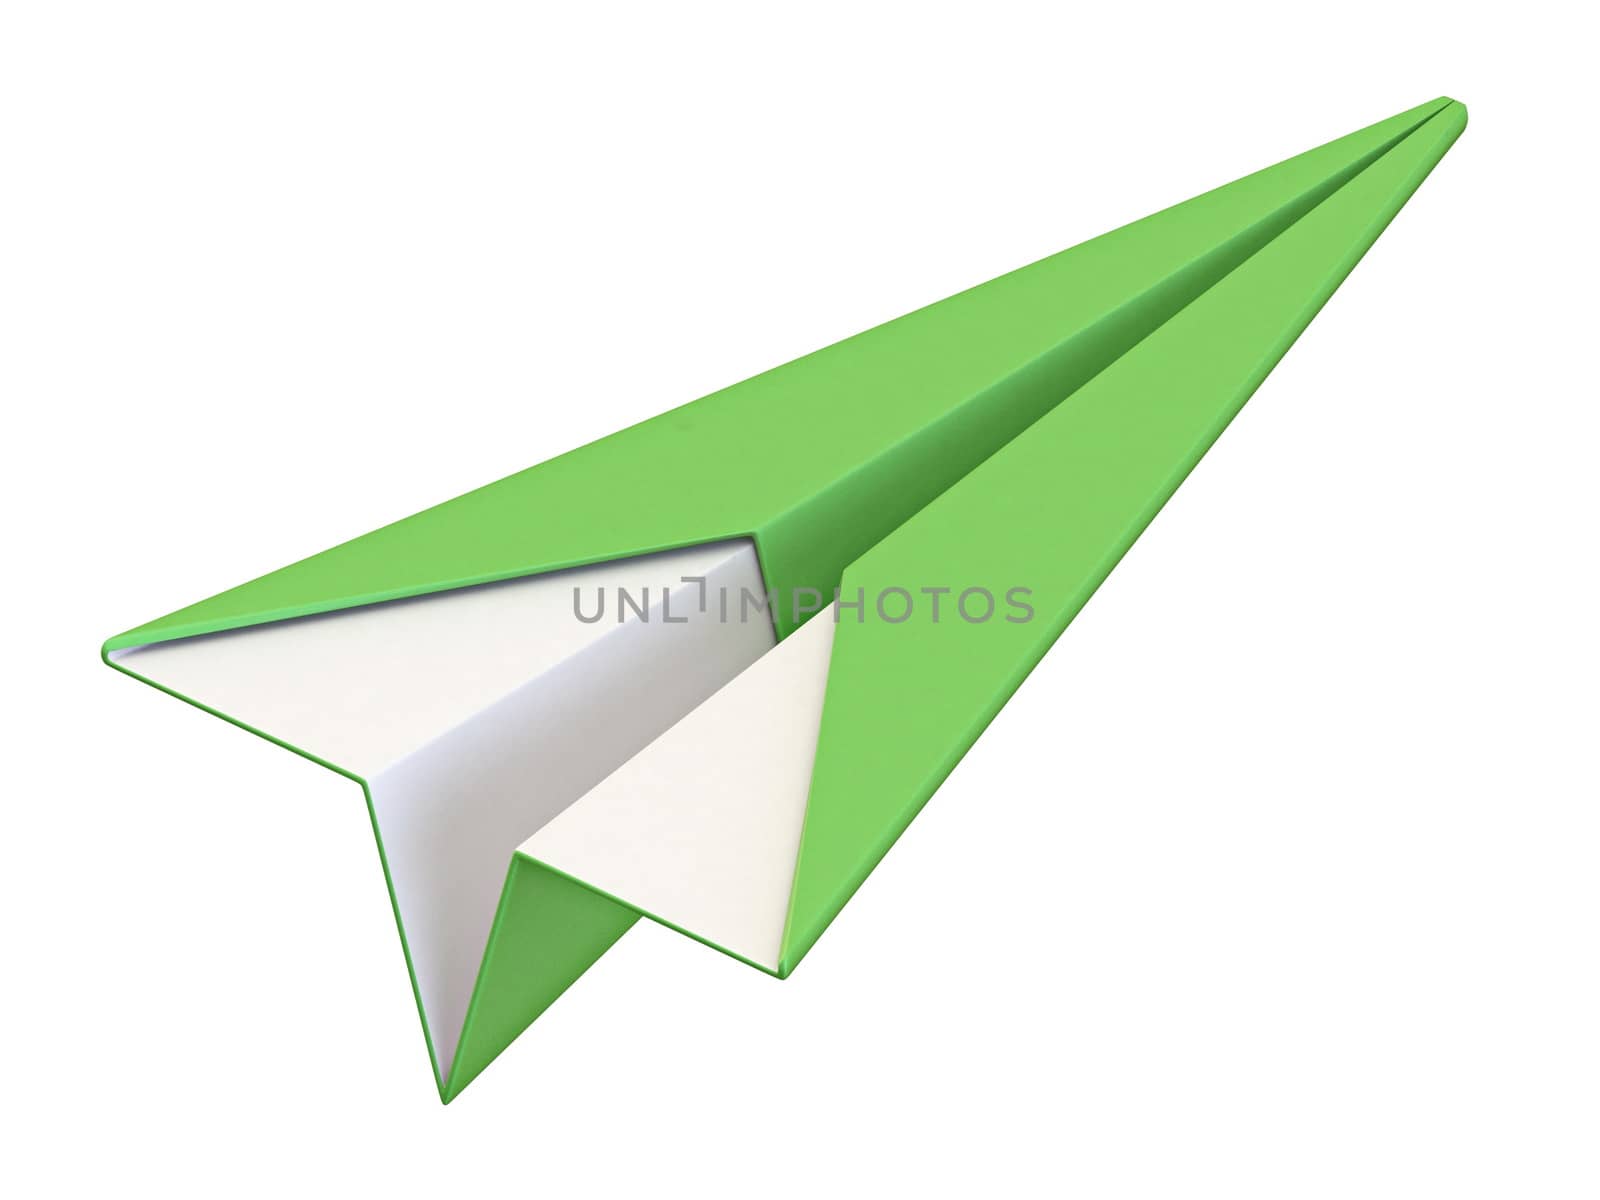 Green origami paper folded airplane 3D render illustration isolated on white background